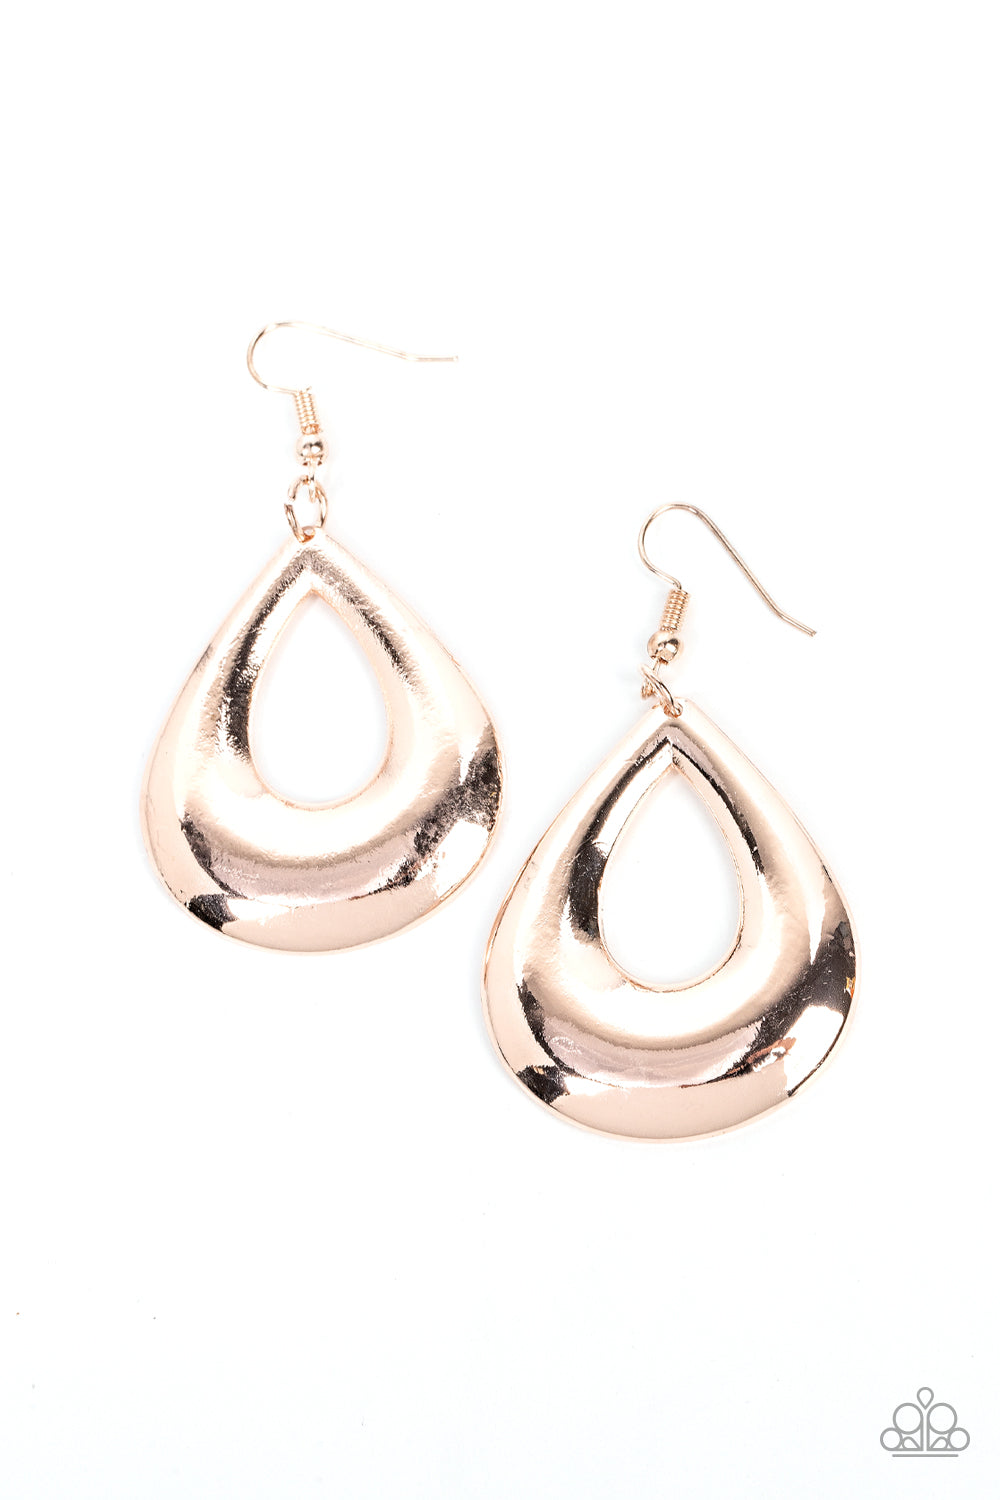 Laid-Back Leisure Earrings by Paparazzi Accessories